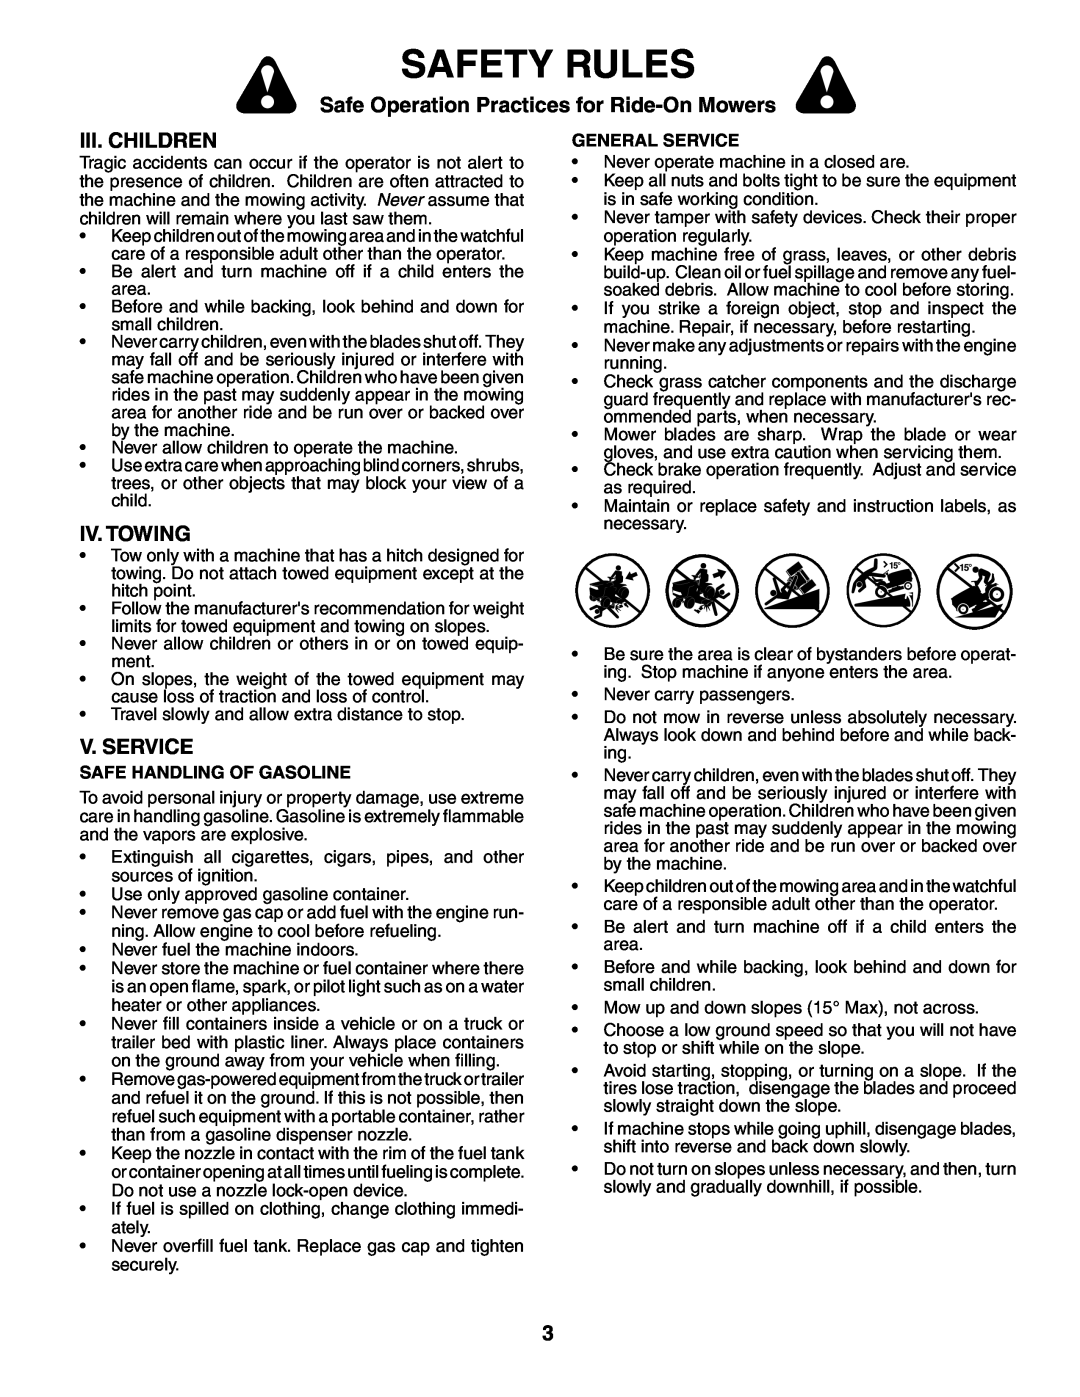 Poulan 195021 manual Iii. Children, Iv. Towing, V. Service, Safety Rules, Safe Operation Practices for Ride-On Mowers 